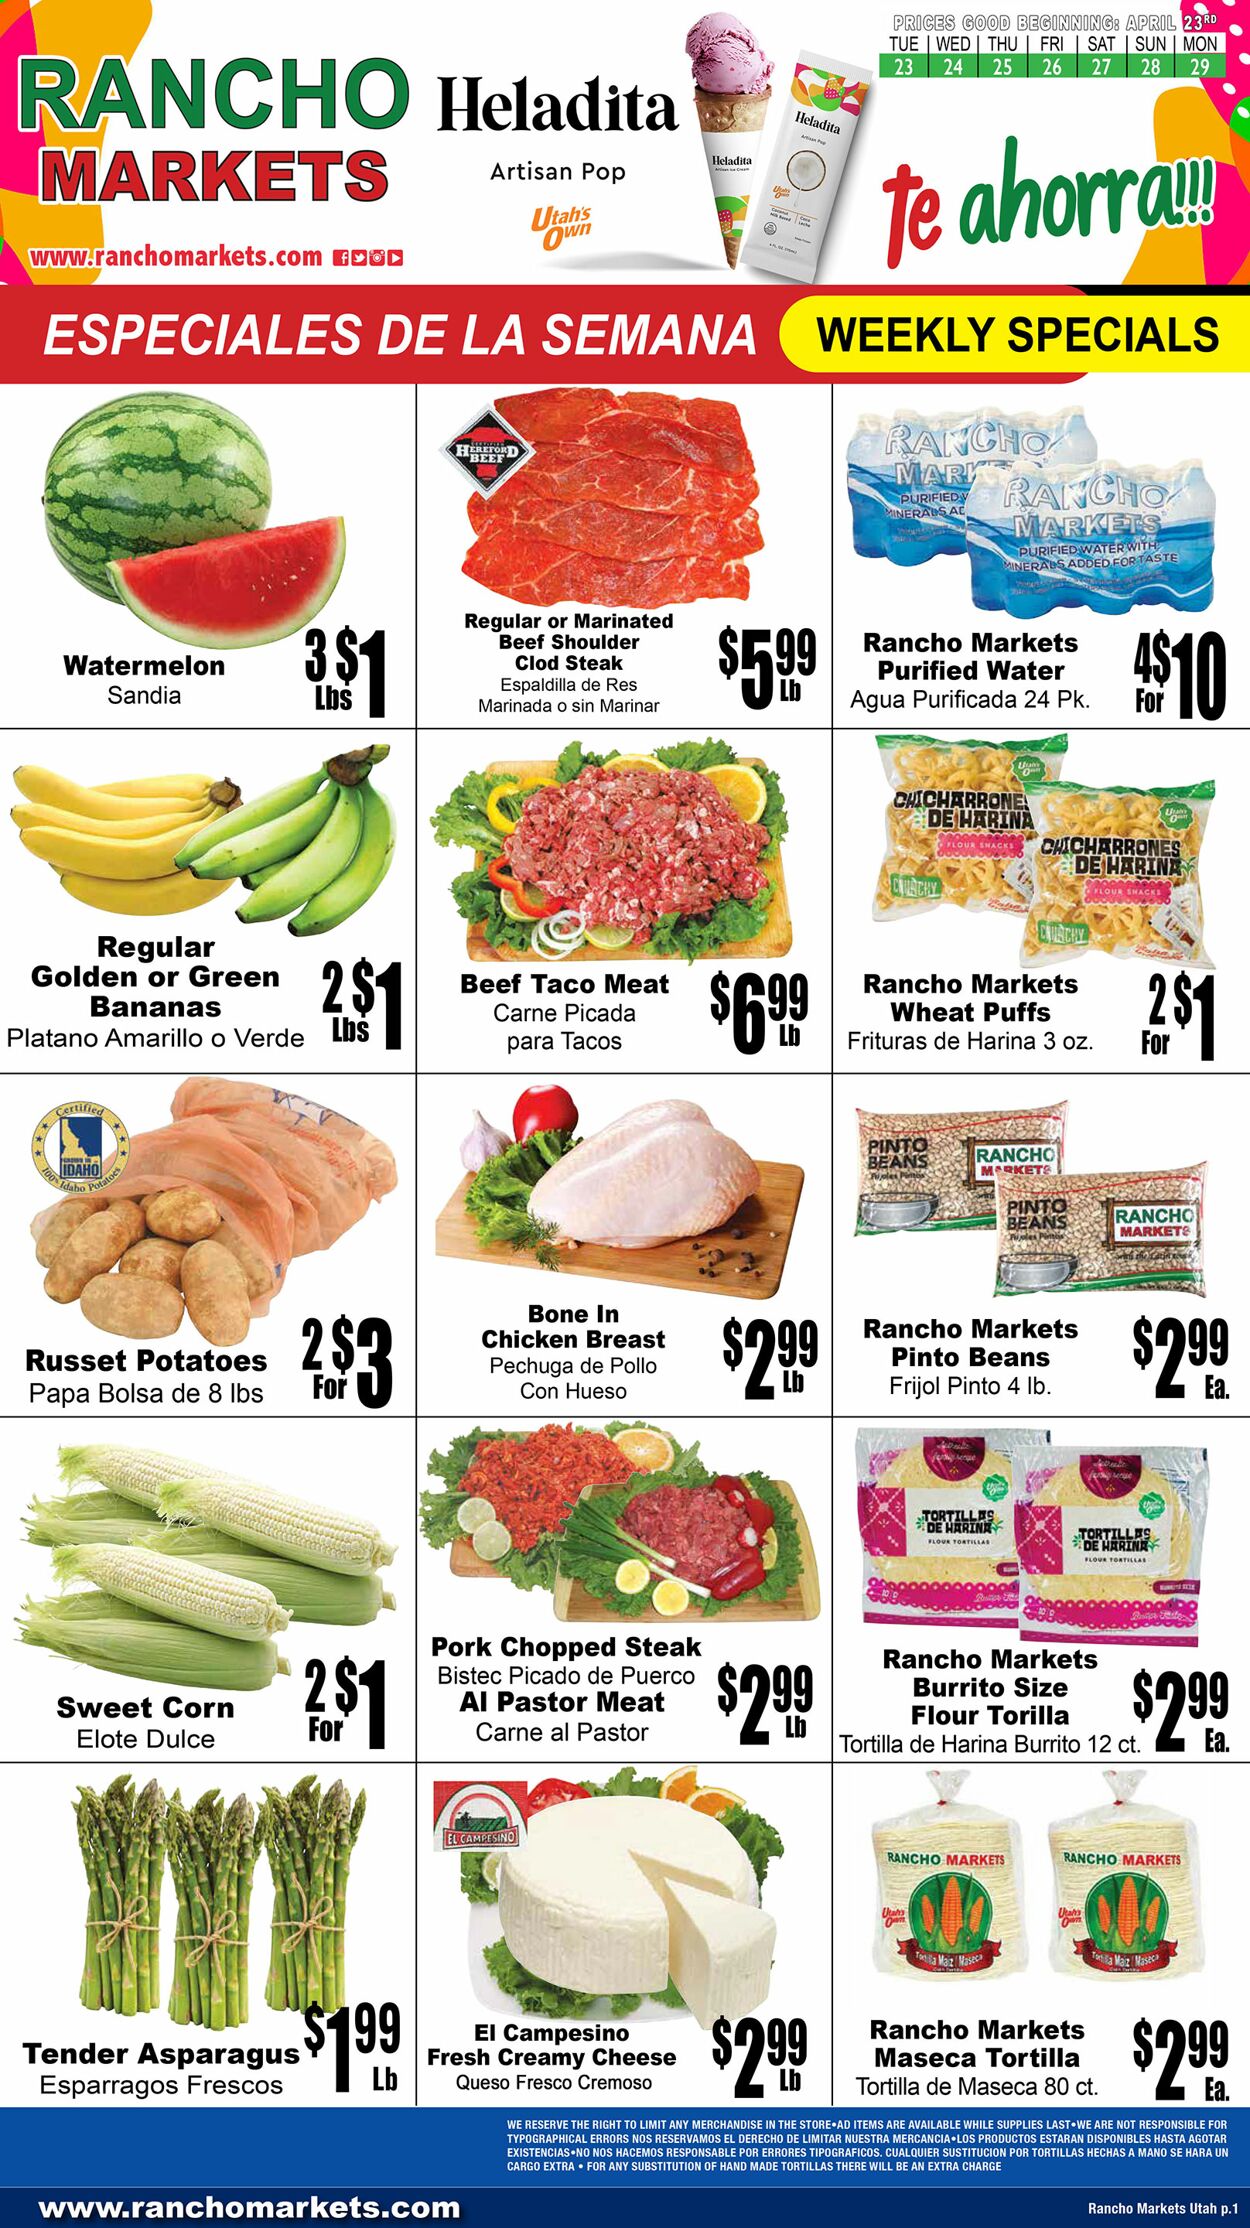 Rancho Markets Promotional weekly ads